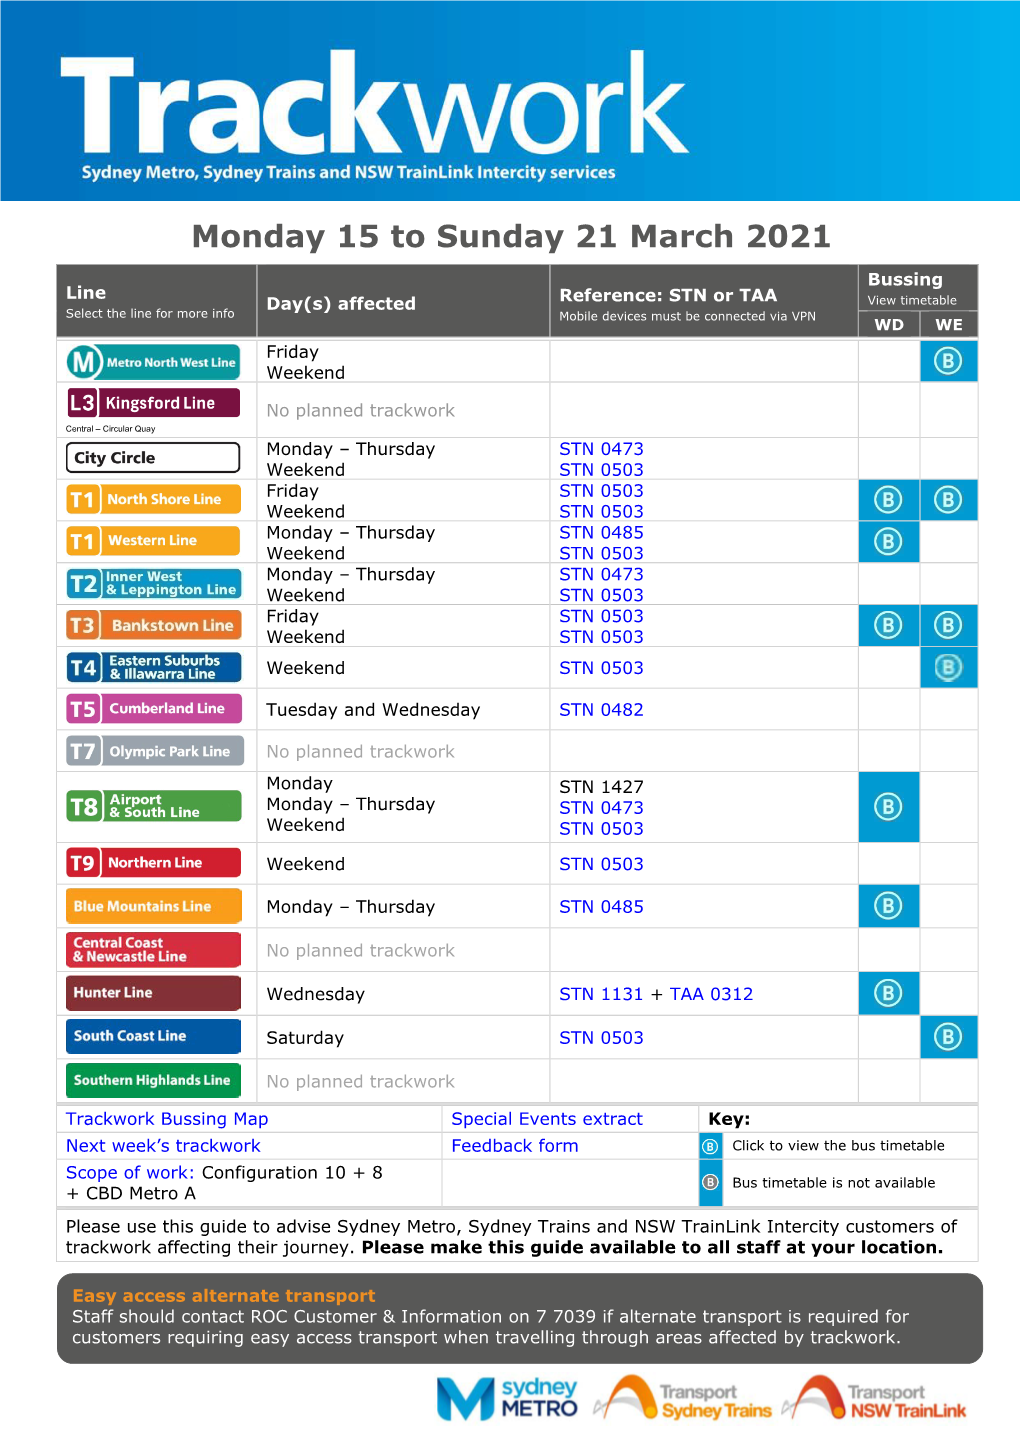 Monday 15 to Sunday 21 March 2021